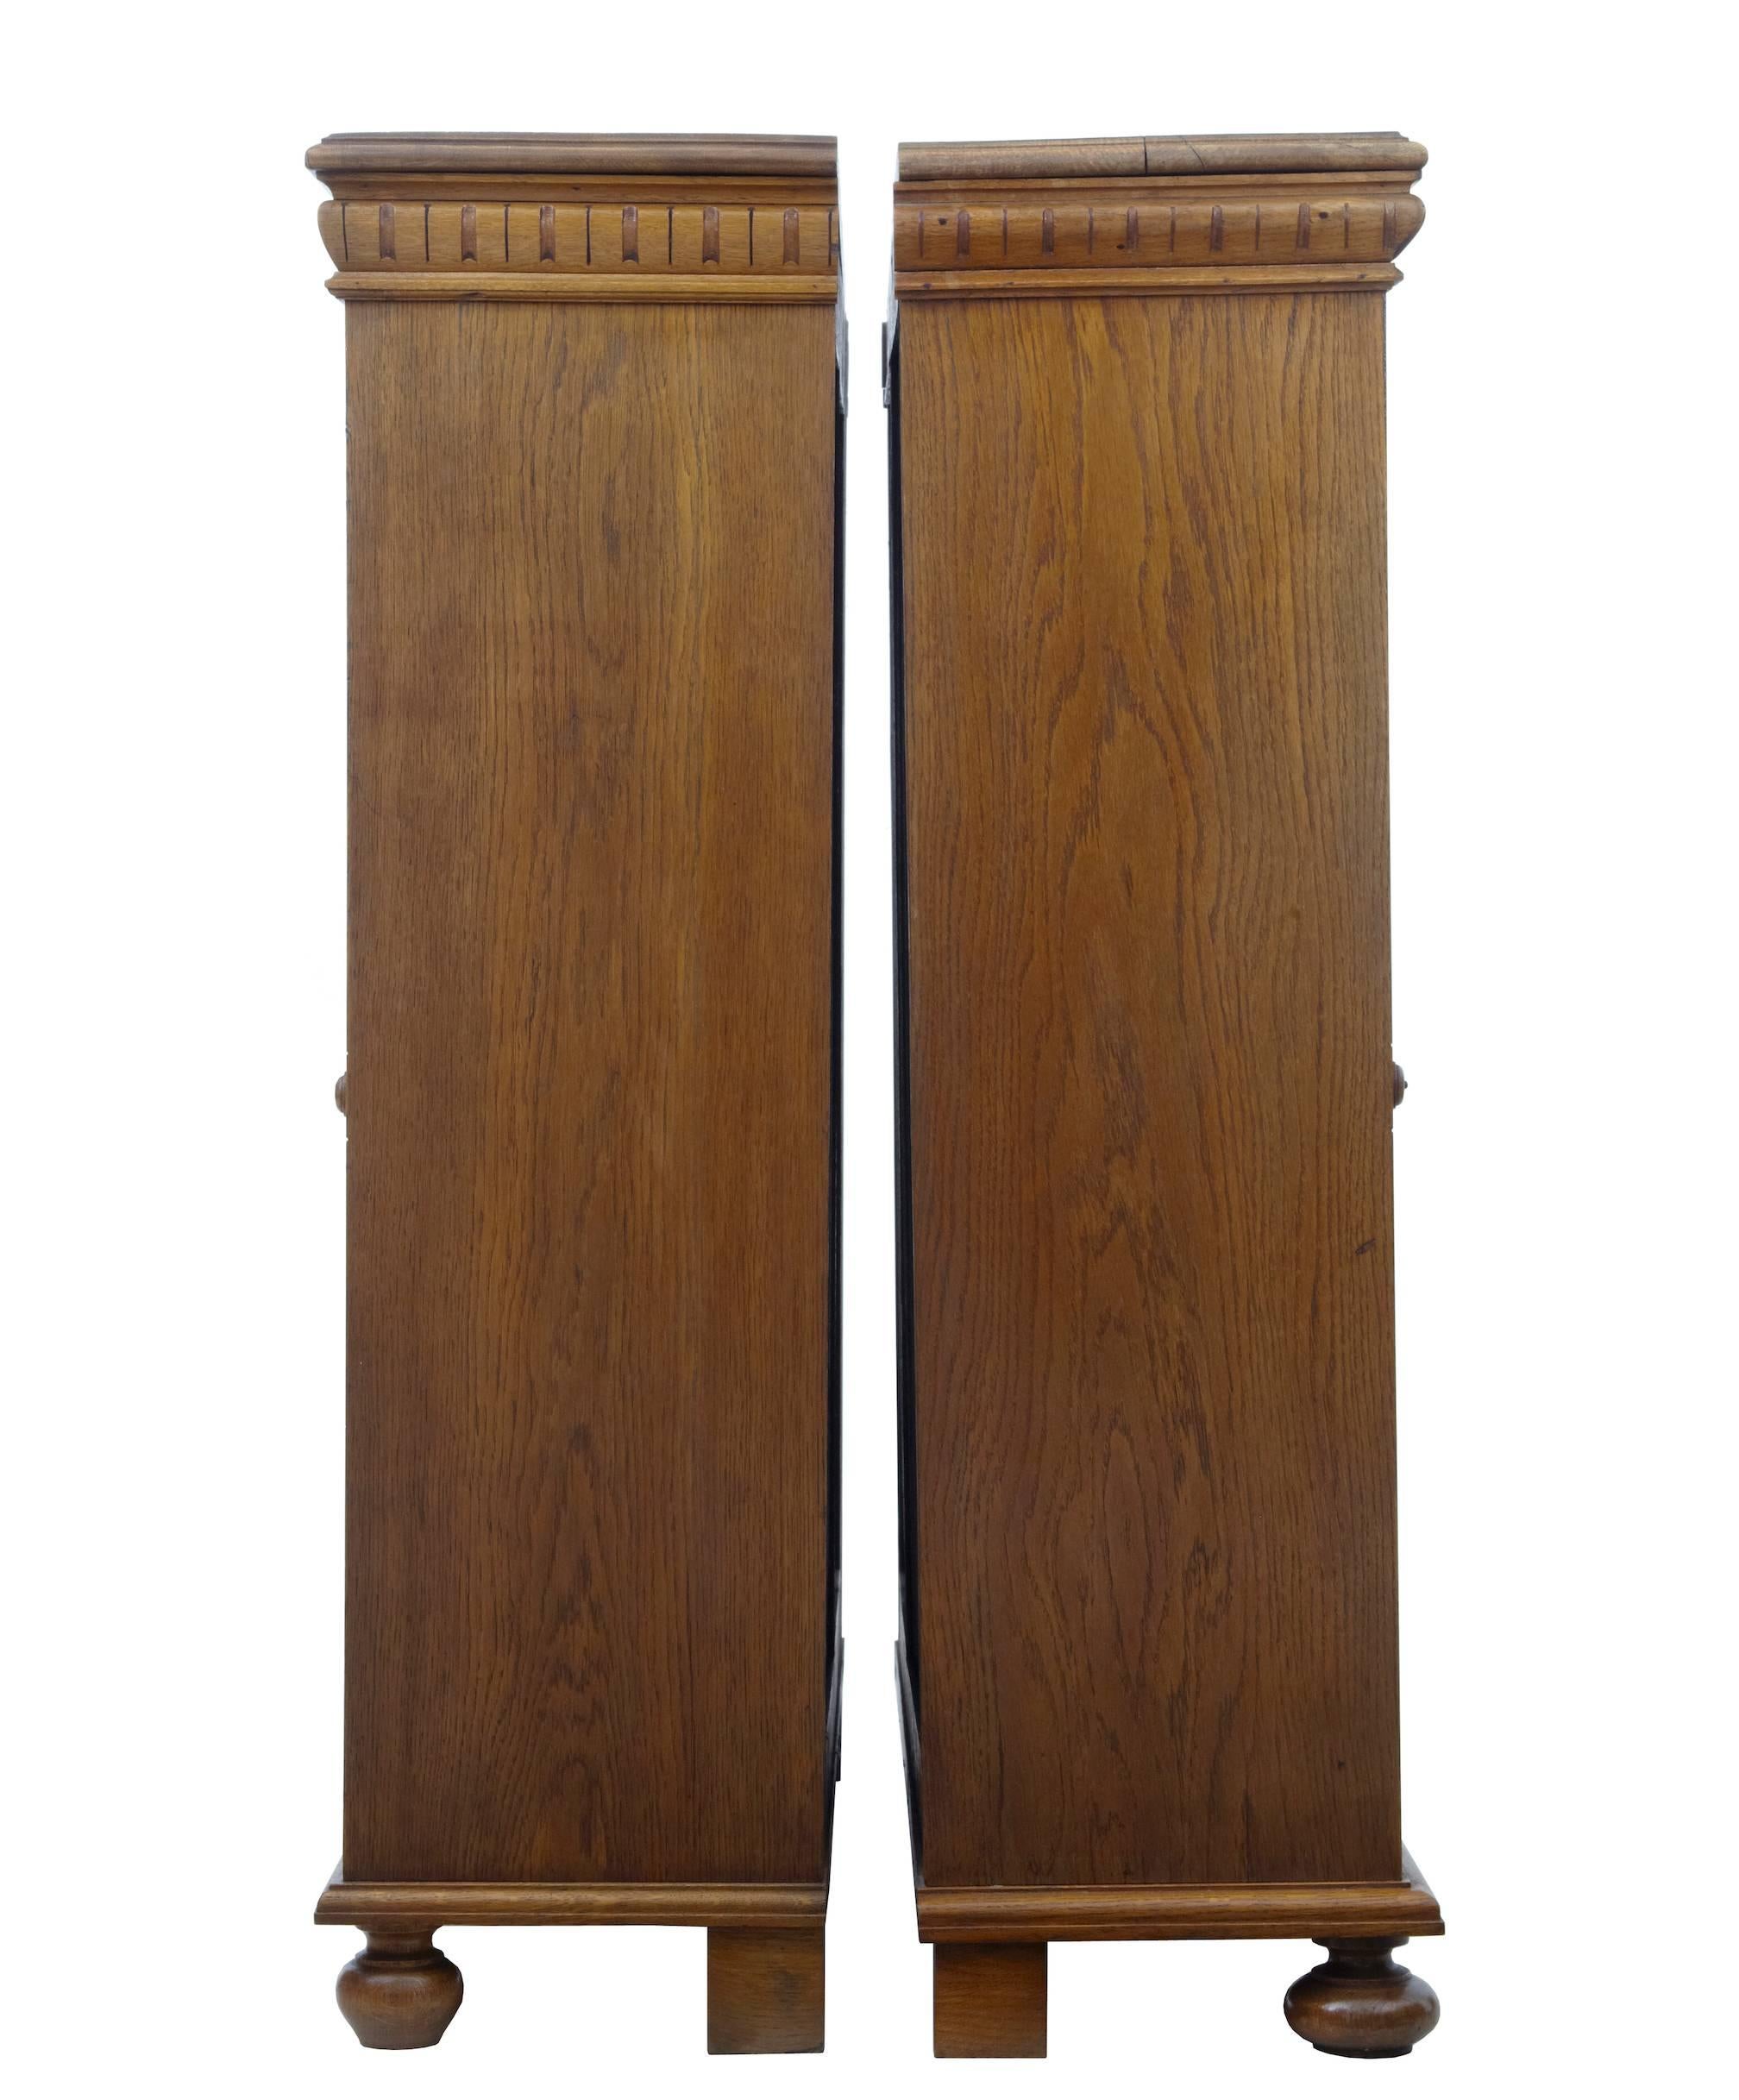 Near pair of open oak bookcases, circa 1910.
Each containing three adjustable shelves.
Different type of bun feet on each.
One with oak veneered shelves the other in pine.
Some surface marks and veneer restoration.

Measures: Height: 43